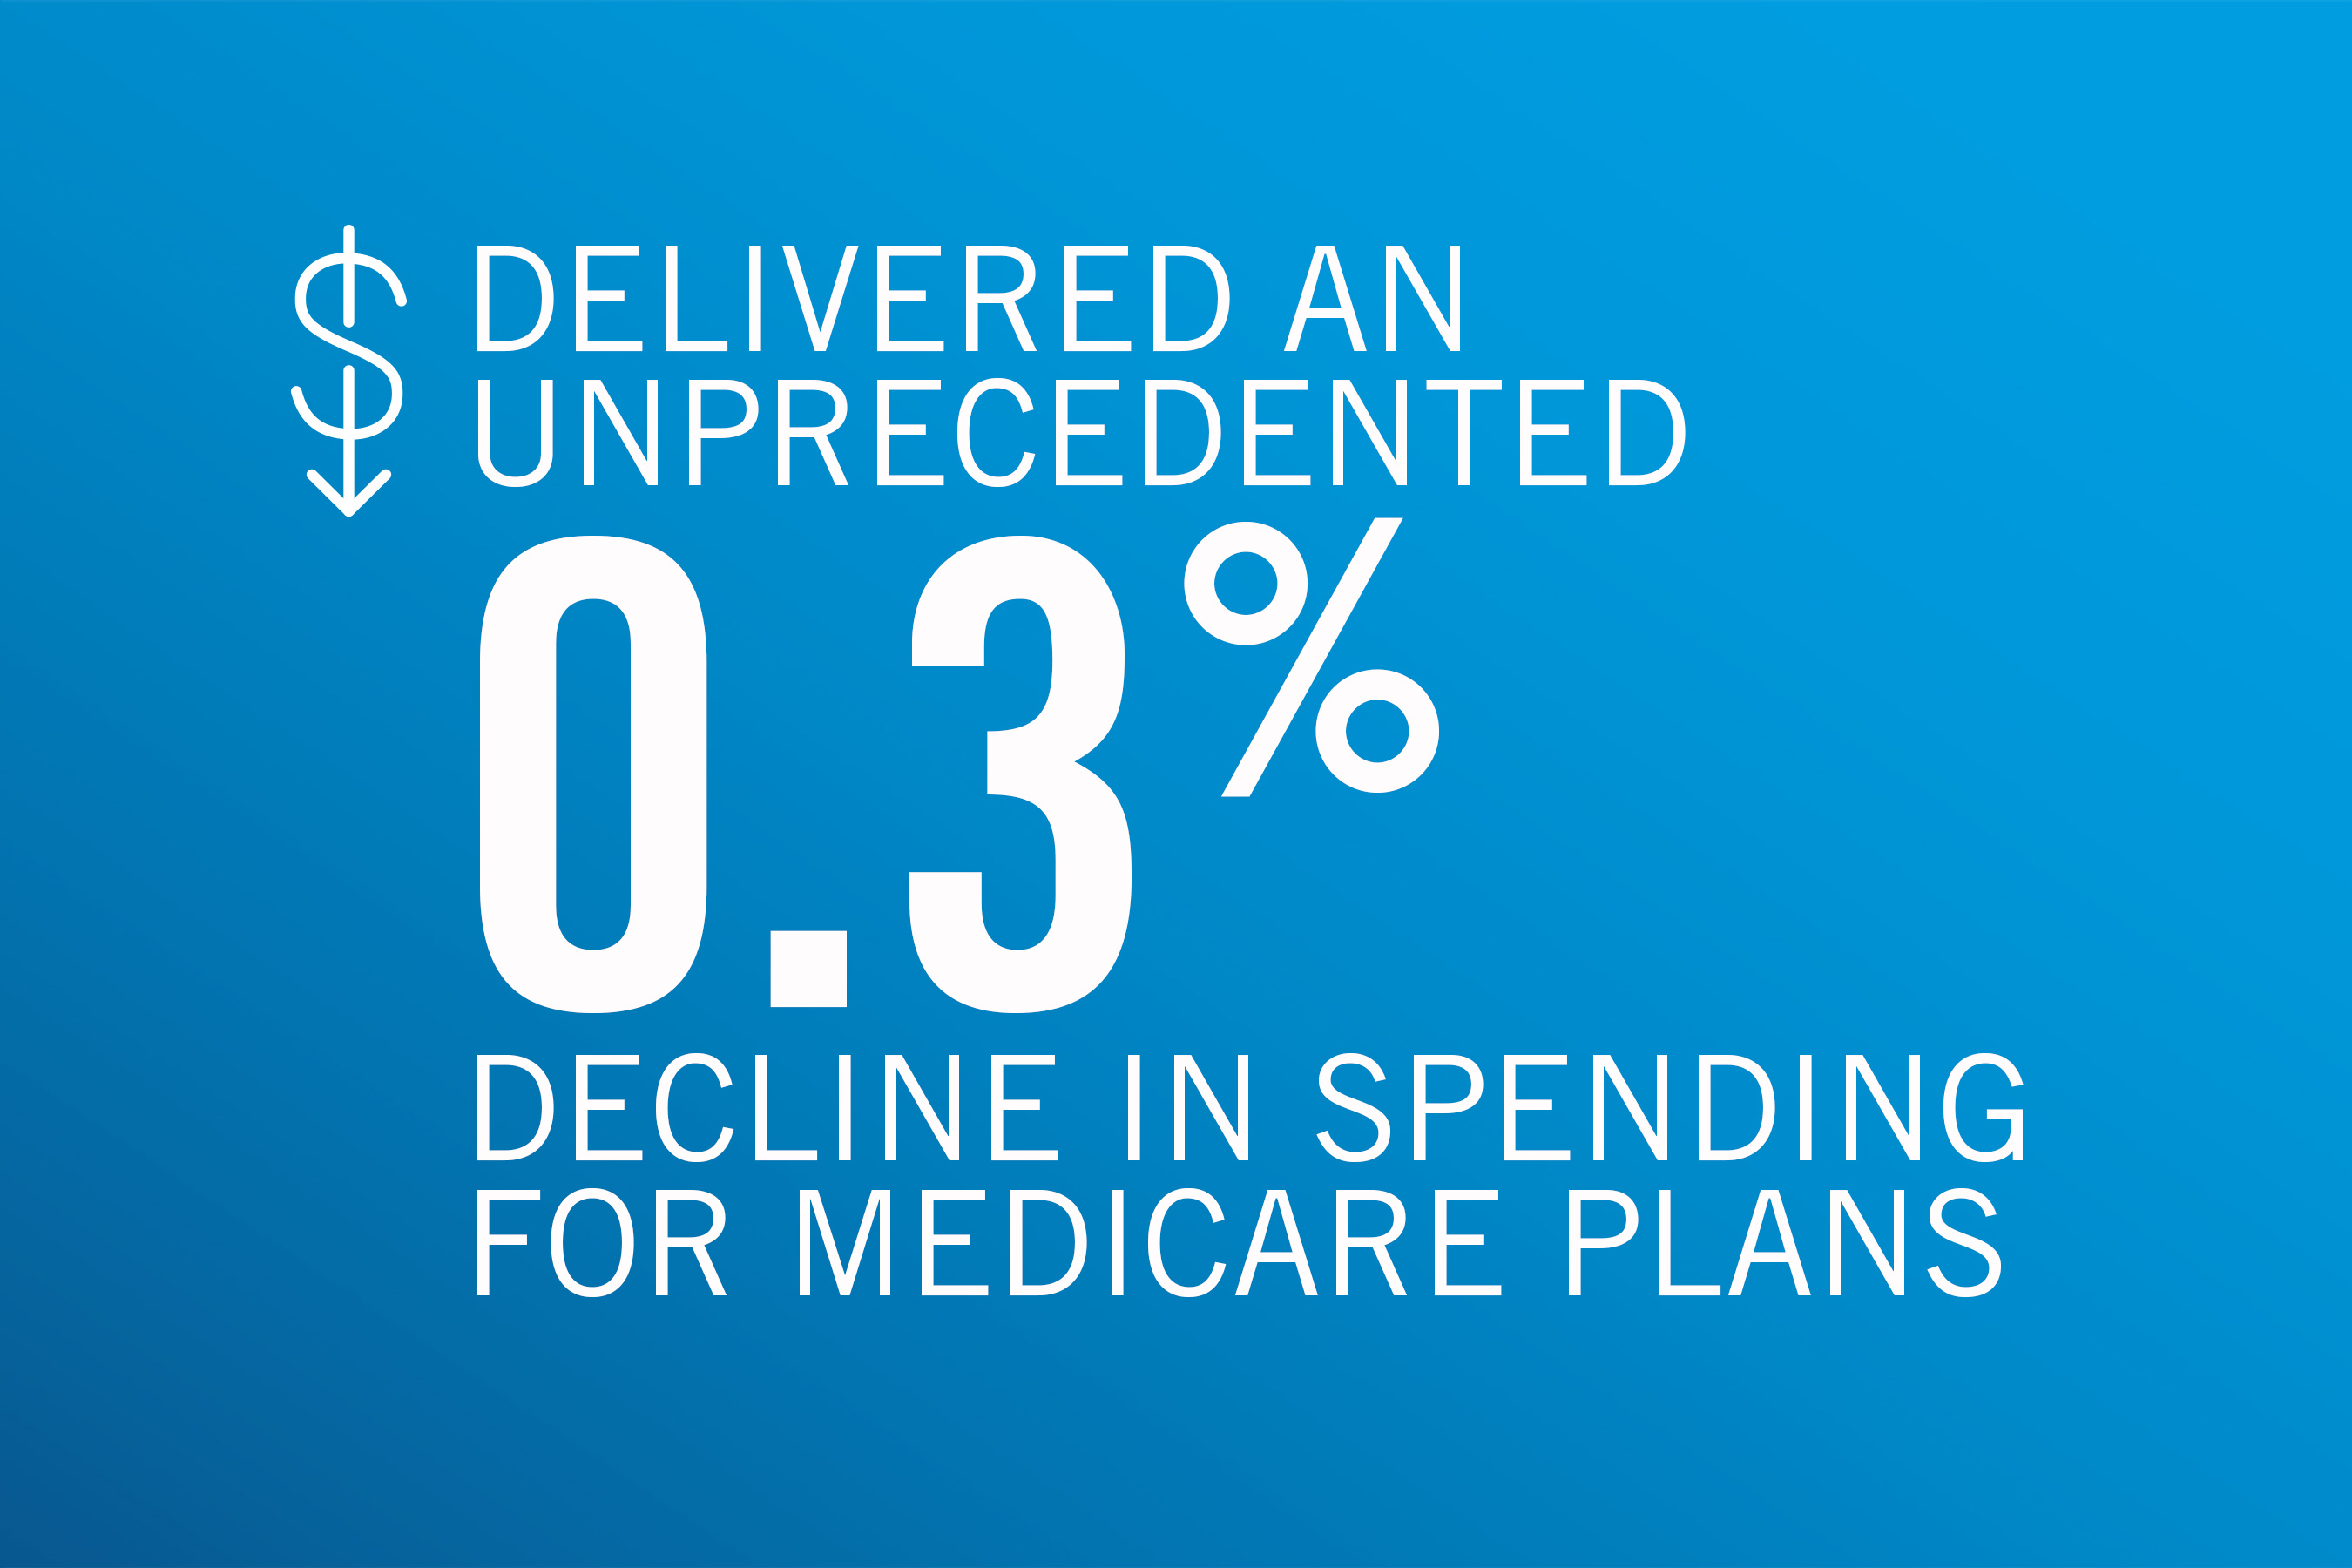 Getting beneficiaries on the right medicine at the right time at the right cost, Express Scripts helped Medicare plans reduce their annual drug spending in 2018.